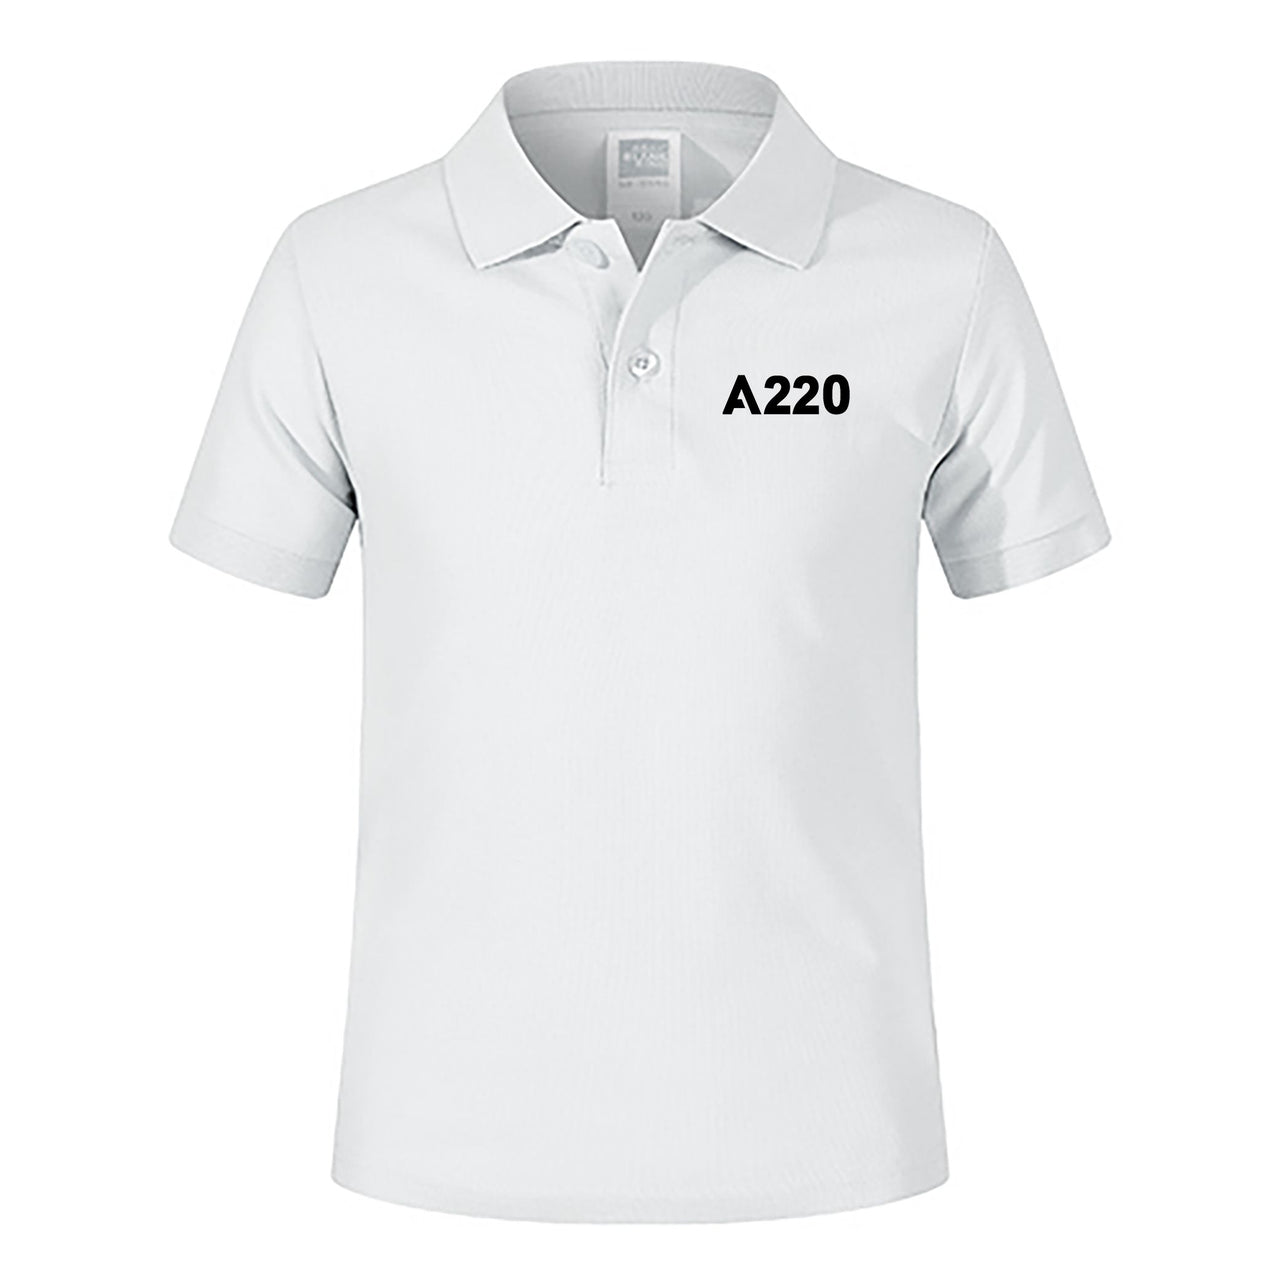 A220 Flat Text Designed Children Polo T-Shirts